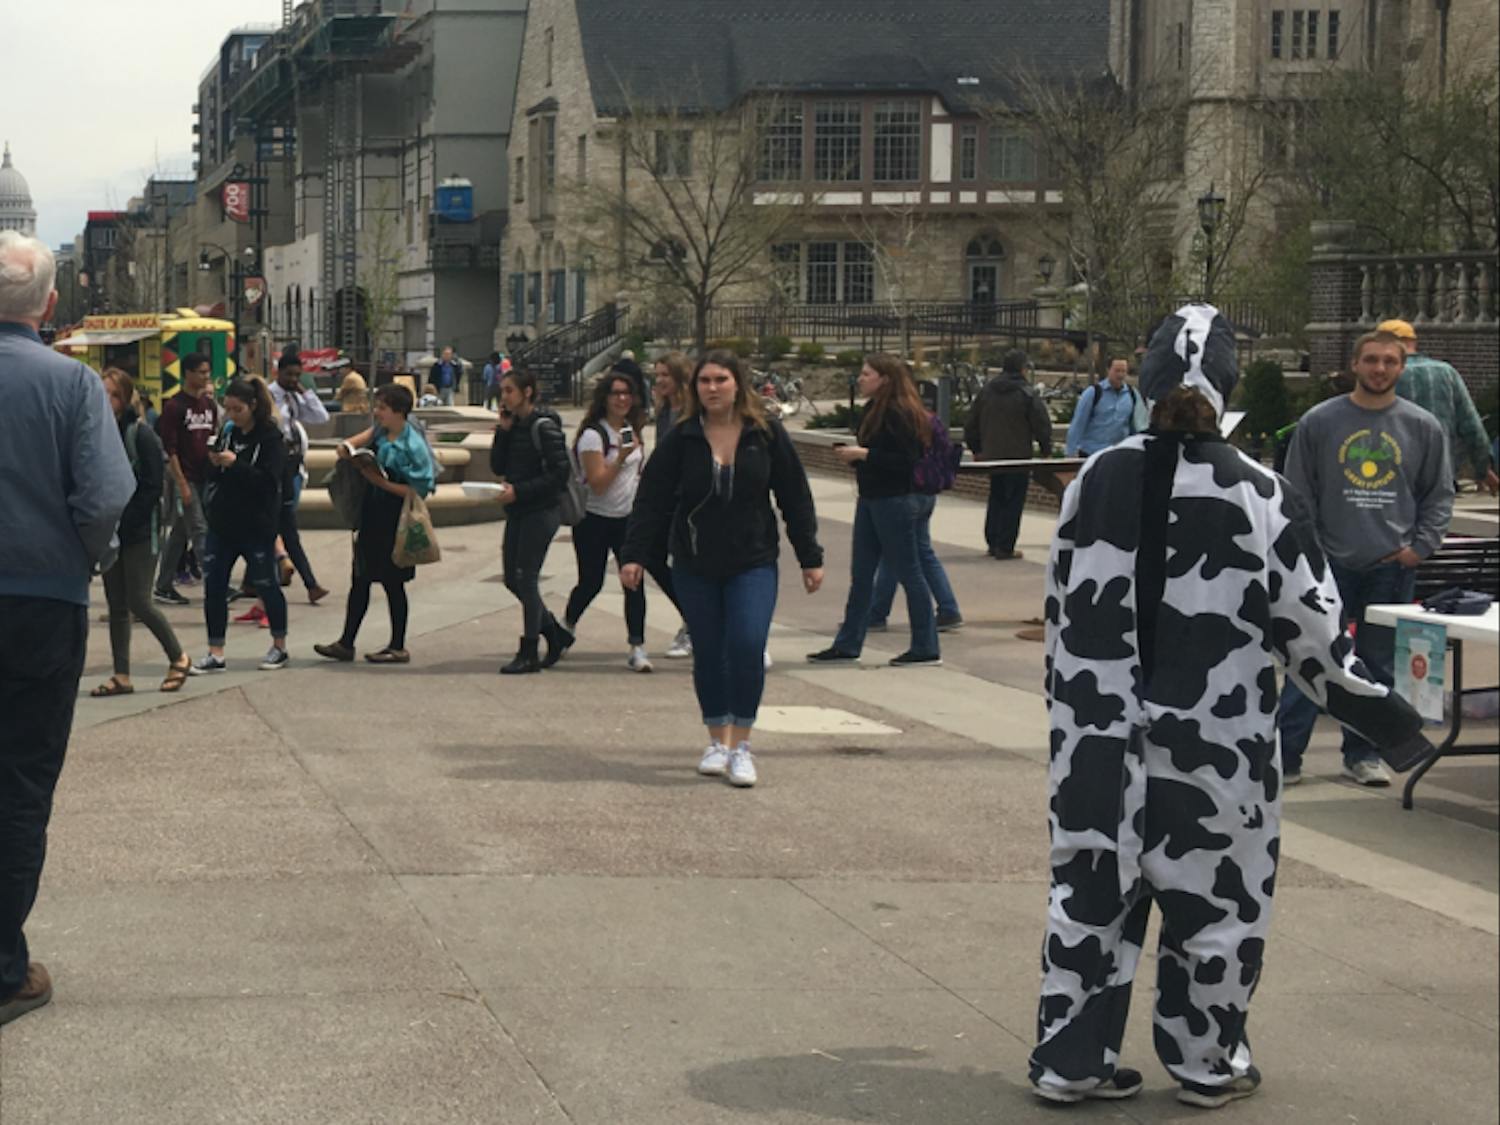 Students wait in line for free local food as a cow costume-donning student looks on.